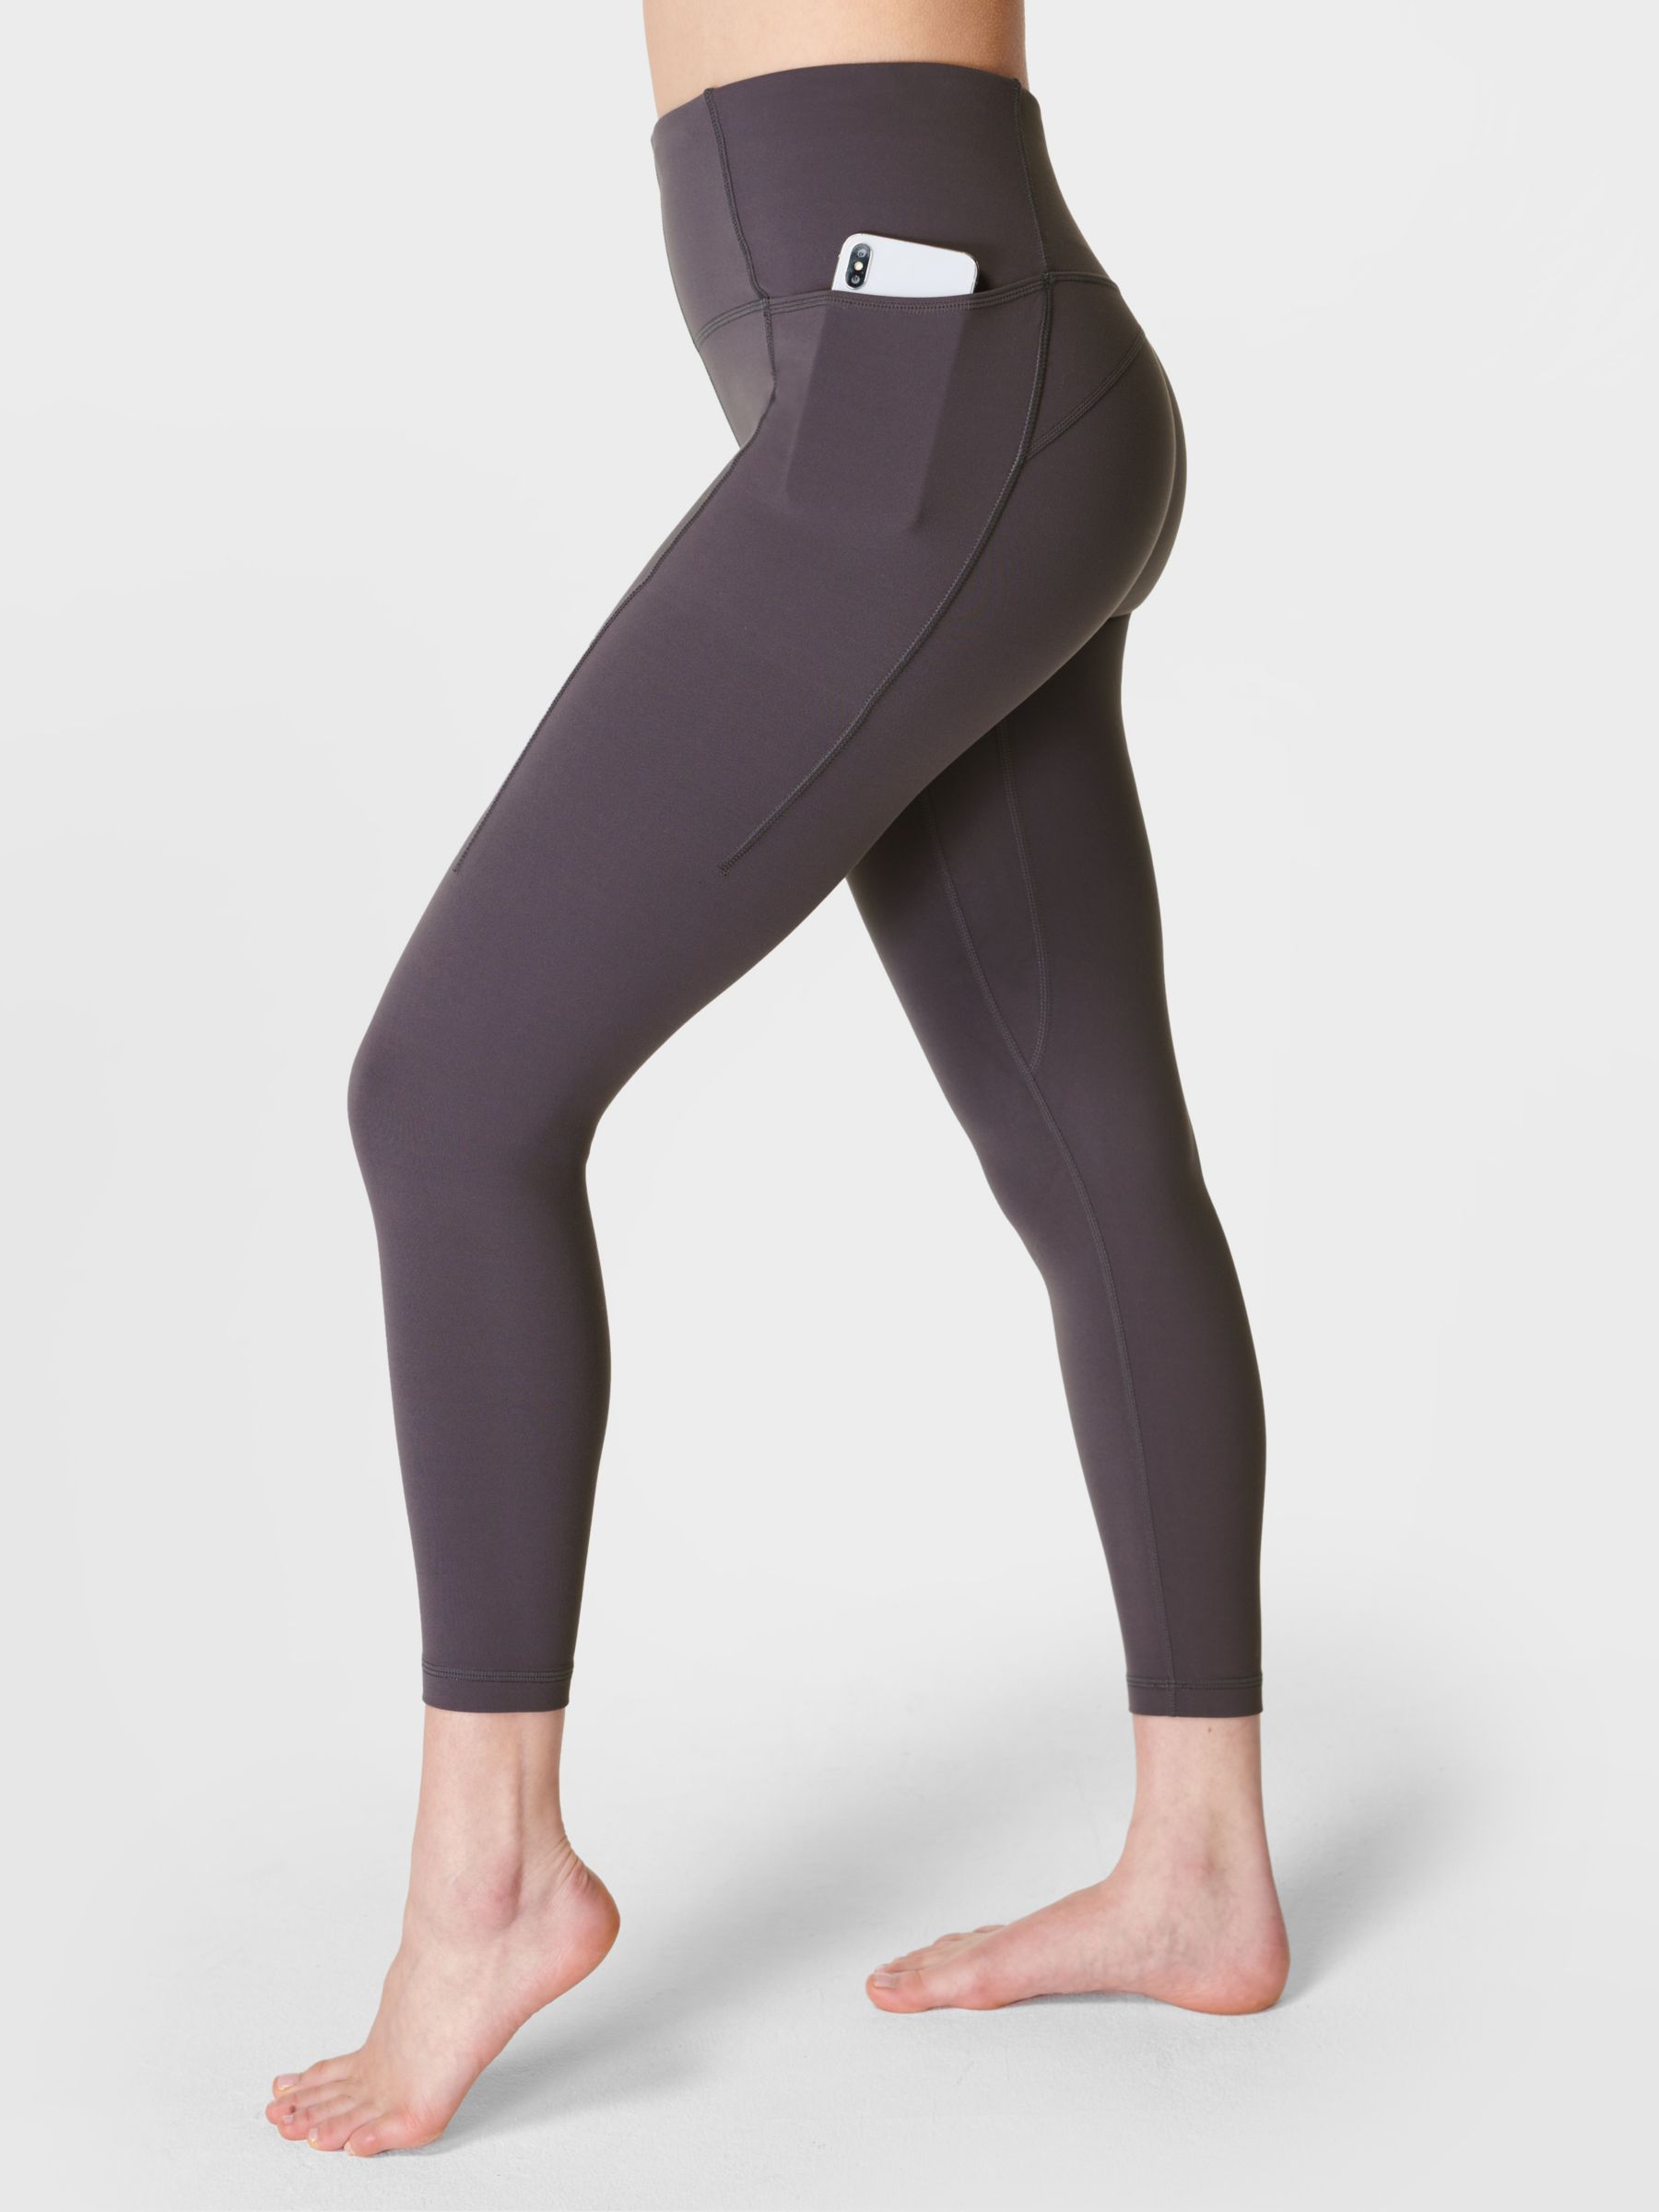 Women's Casual Ultra-Soft Smooth High Waisted Yoga Leggings(Plus